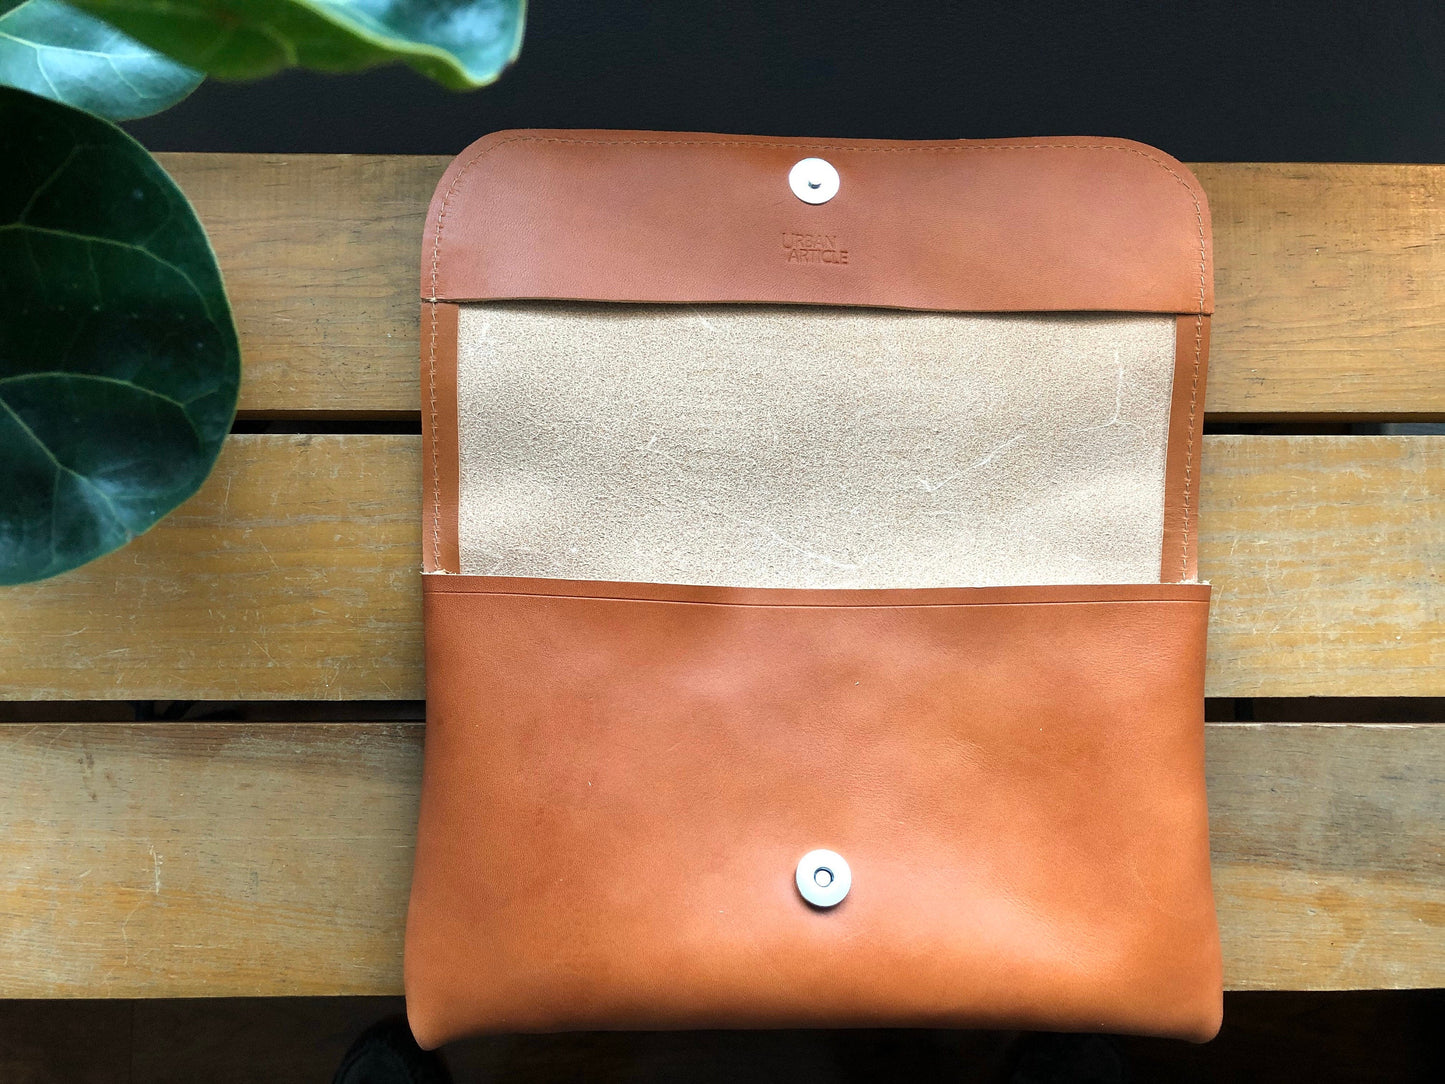 Tan leather clutch opened to see natural leather interior and magnetic clasp